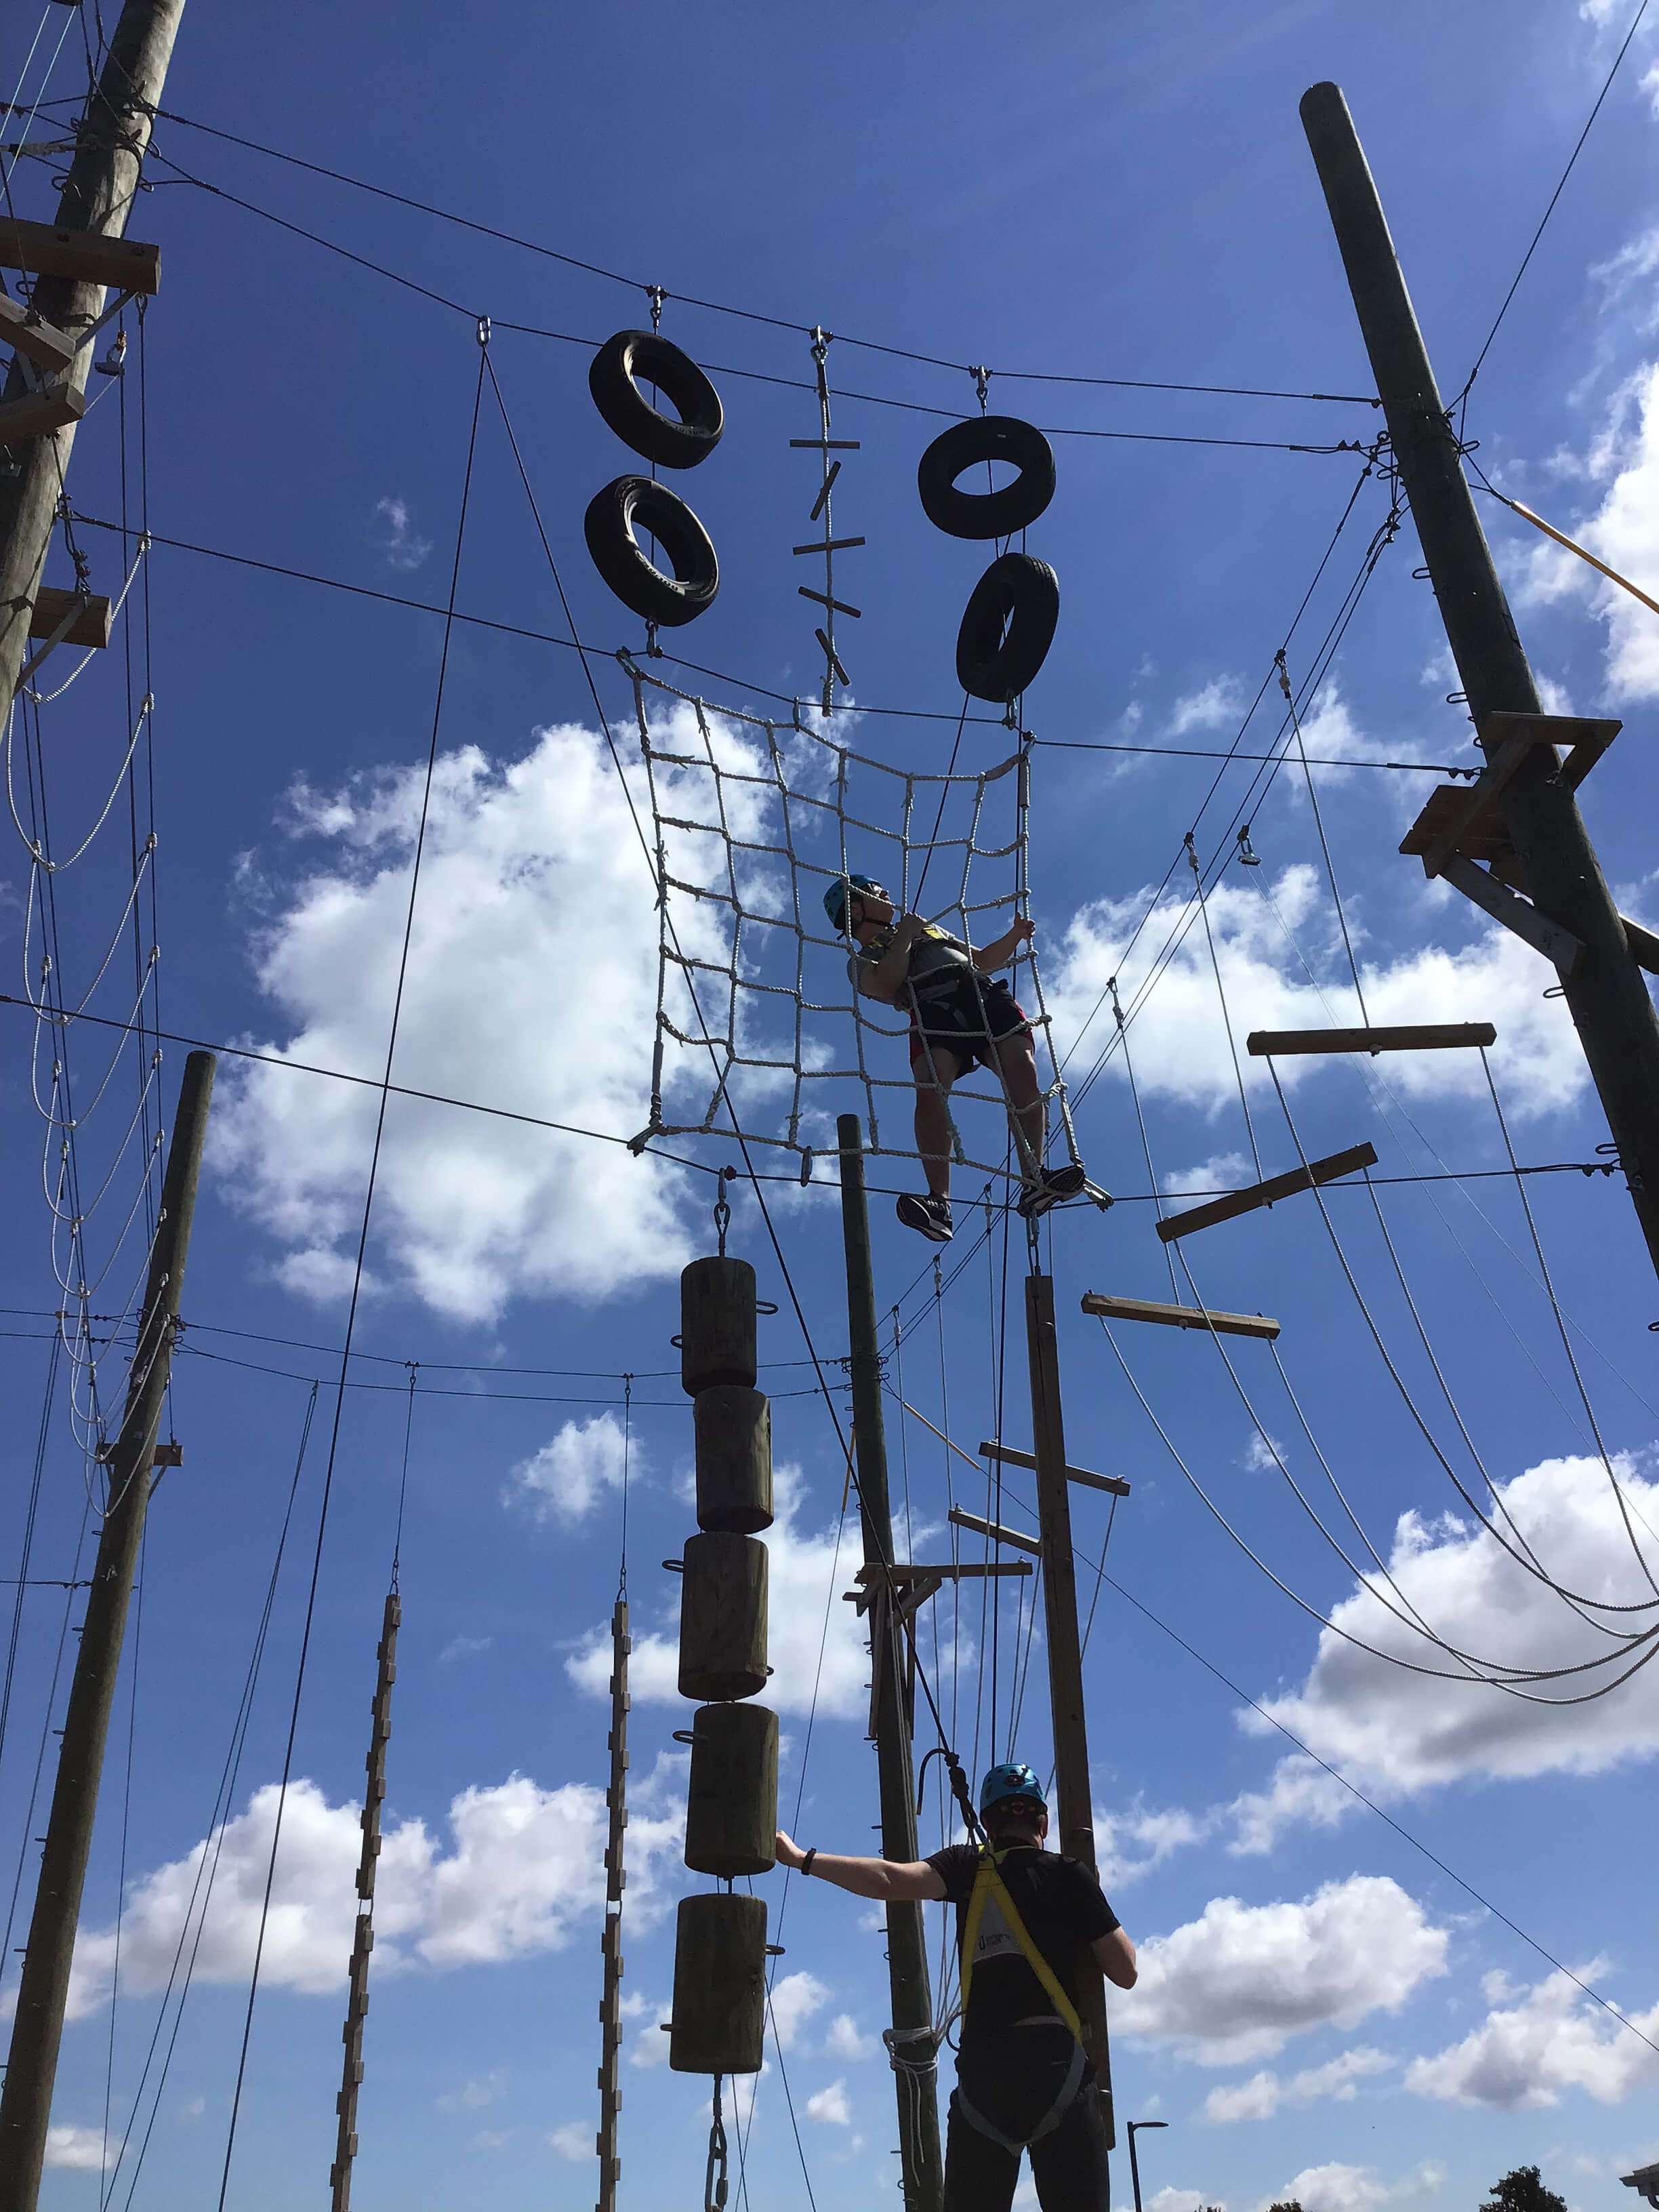 vertical playpen on high ropes course